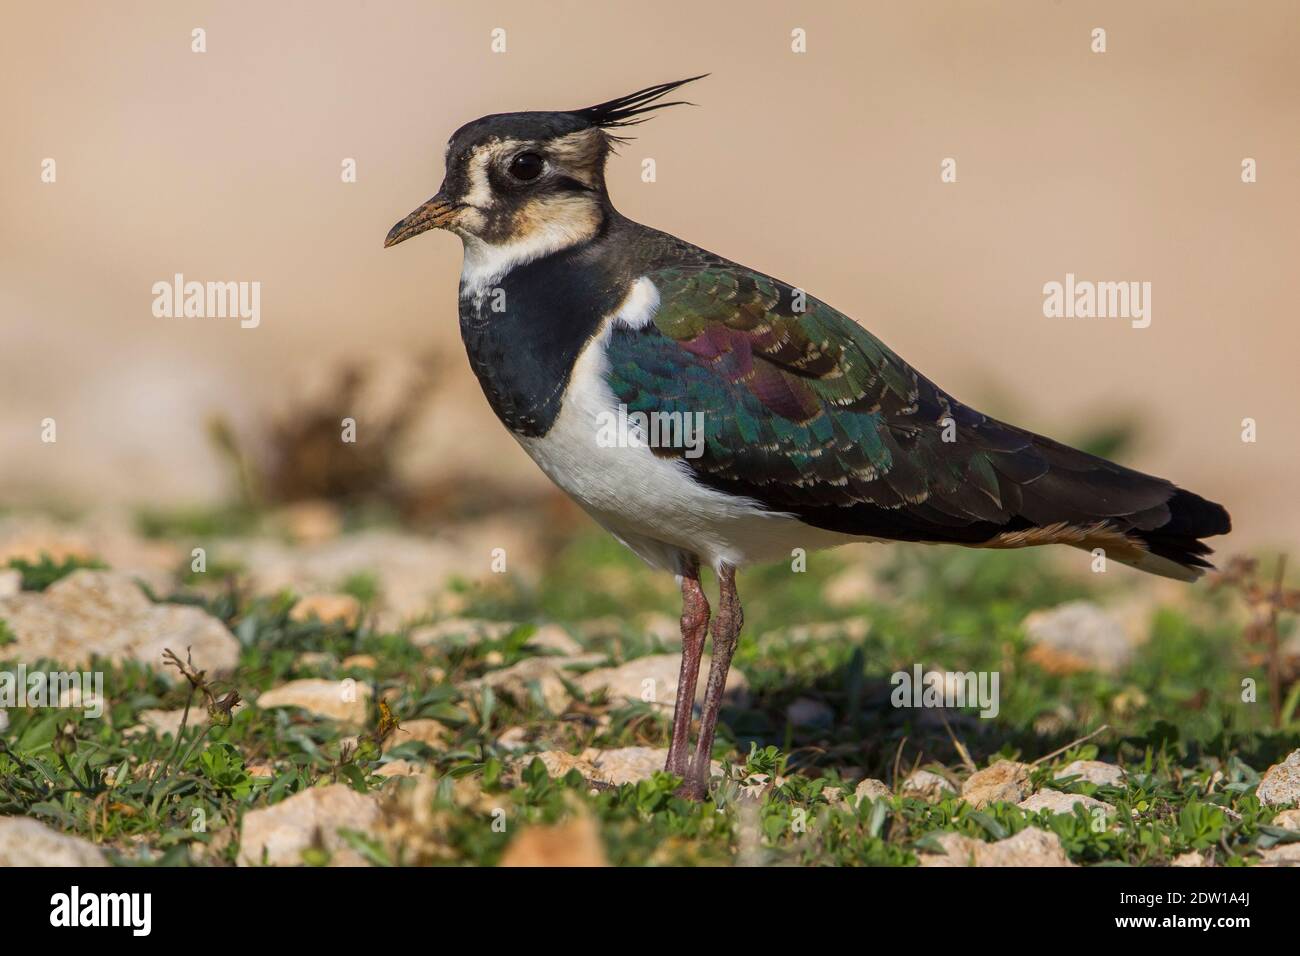 Winter plumaged Northern Lapwing standing on dry ground. Stock Photo